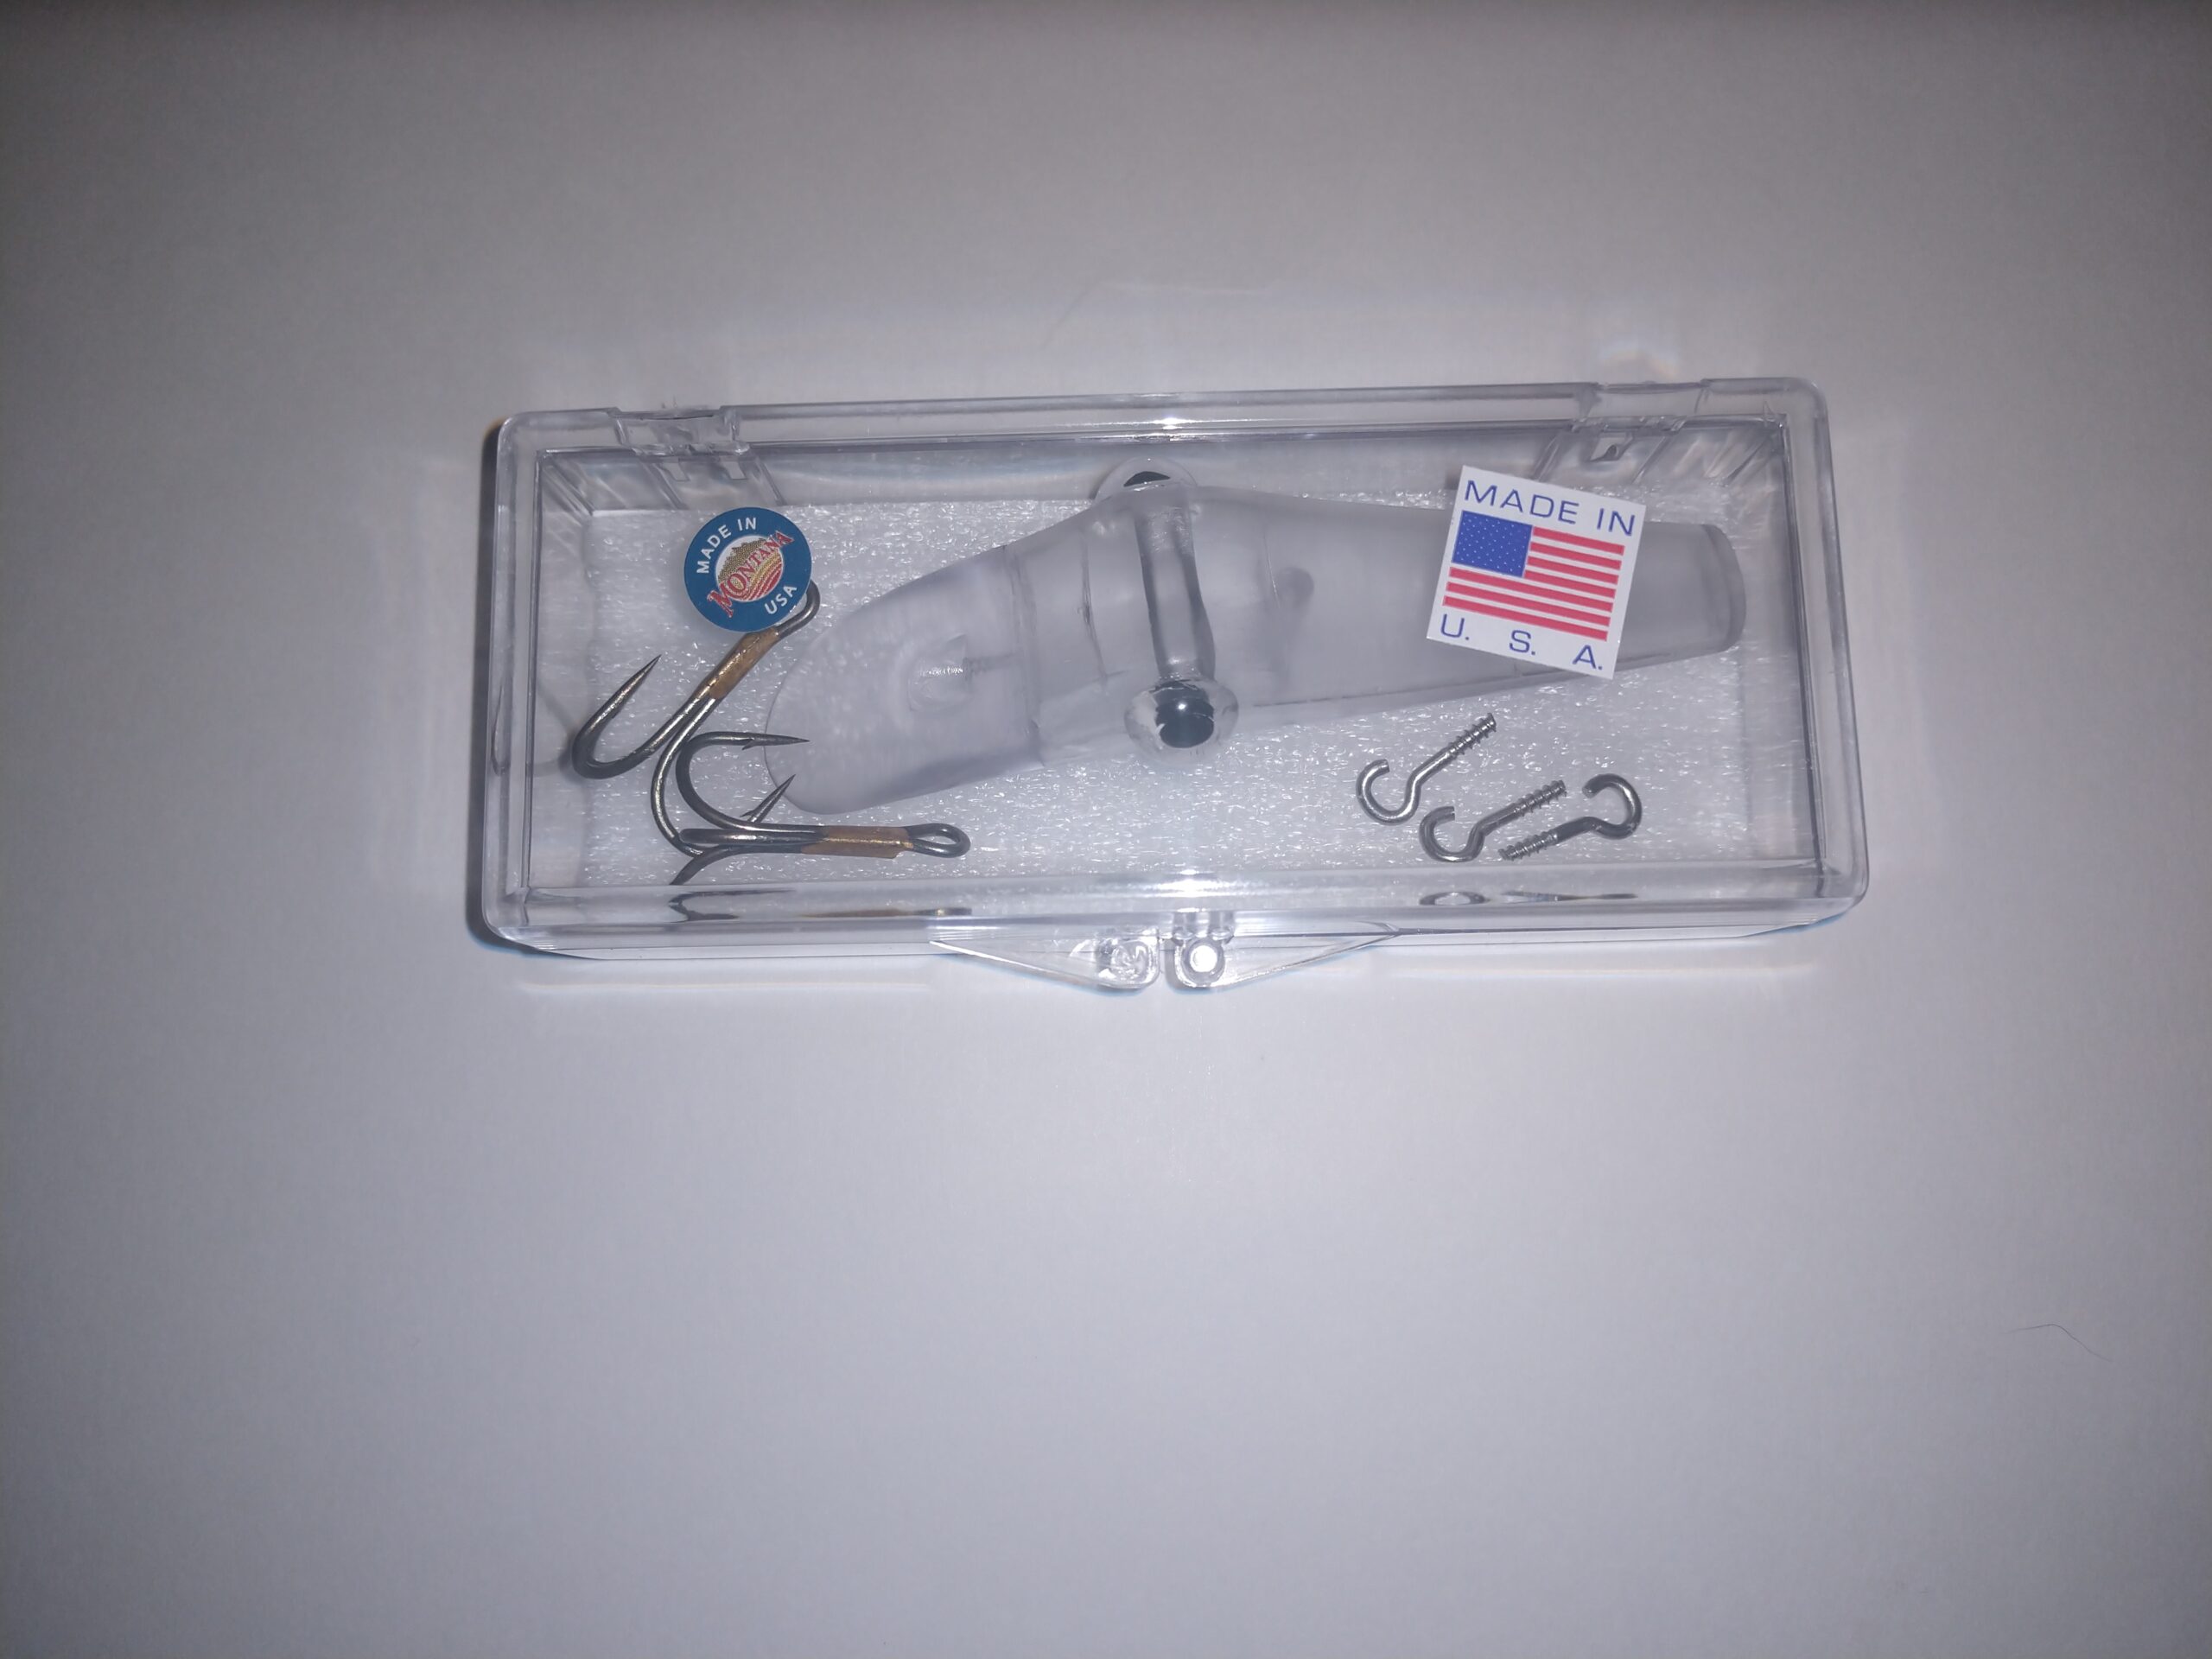 Blanks - Swarthout's Original Ping-A-T Lures